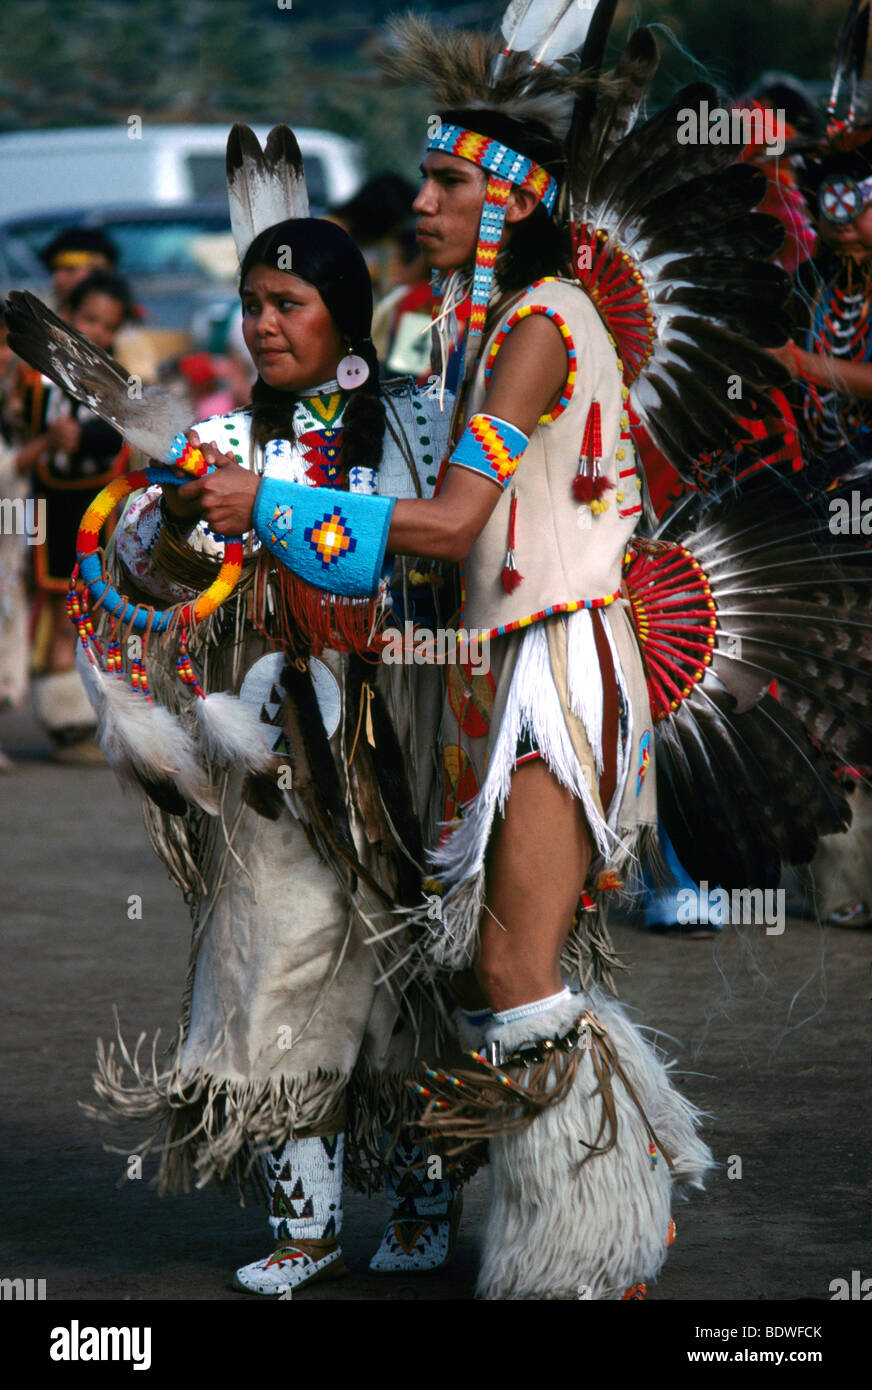 Native American Indian Dancers in Traditional Regalia at a Pow Wow on ...